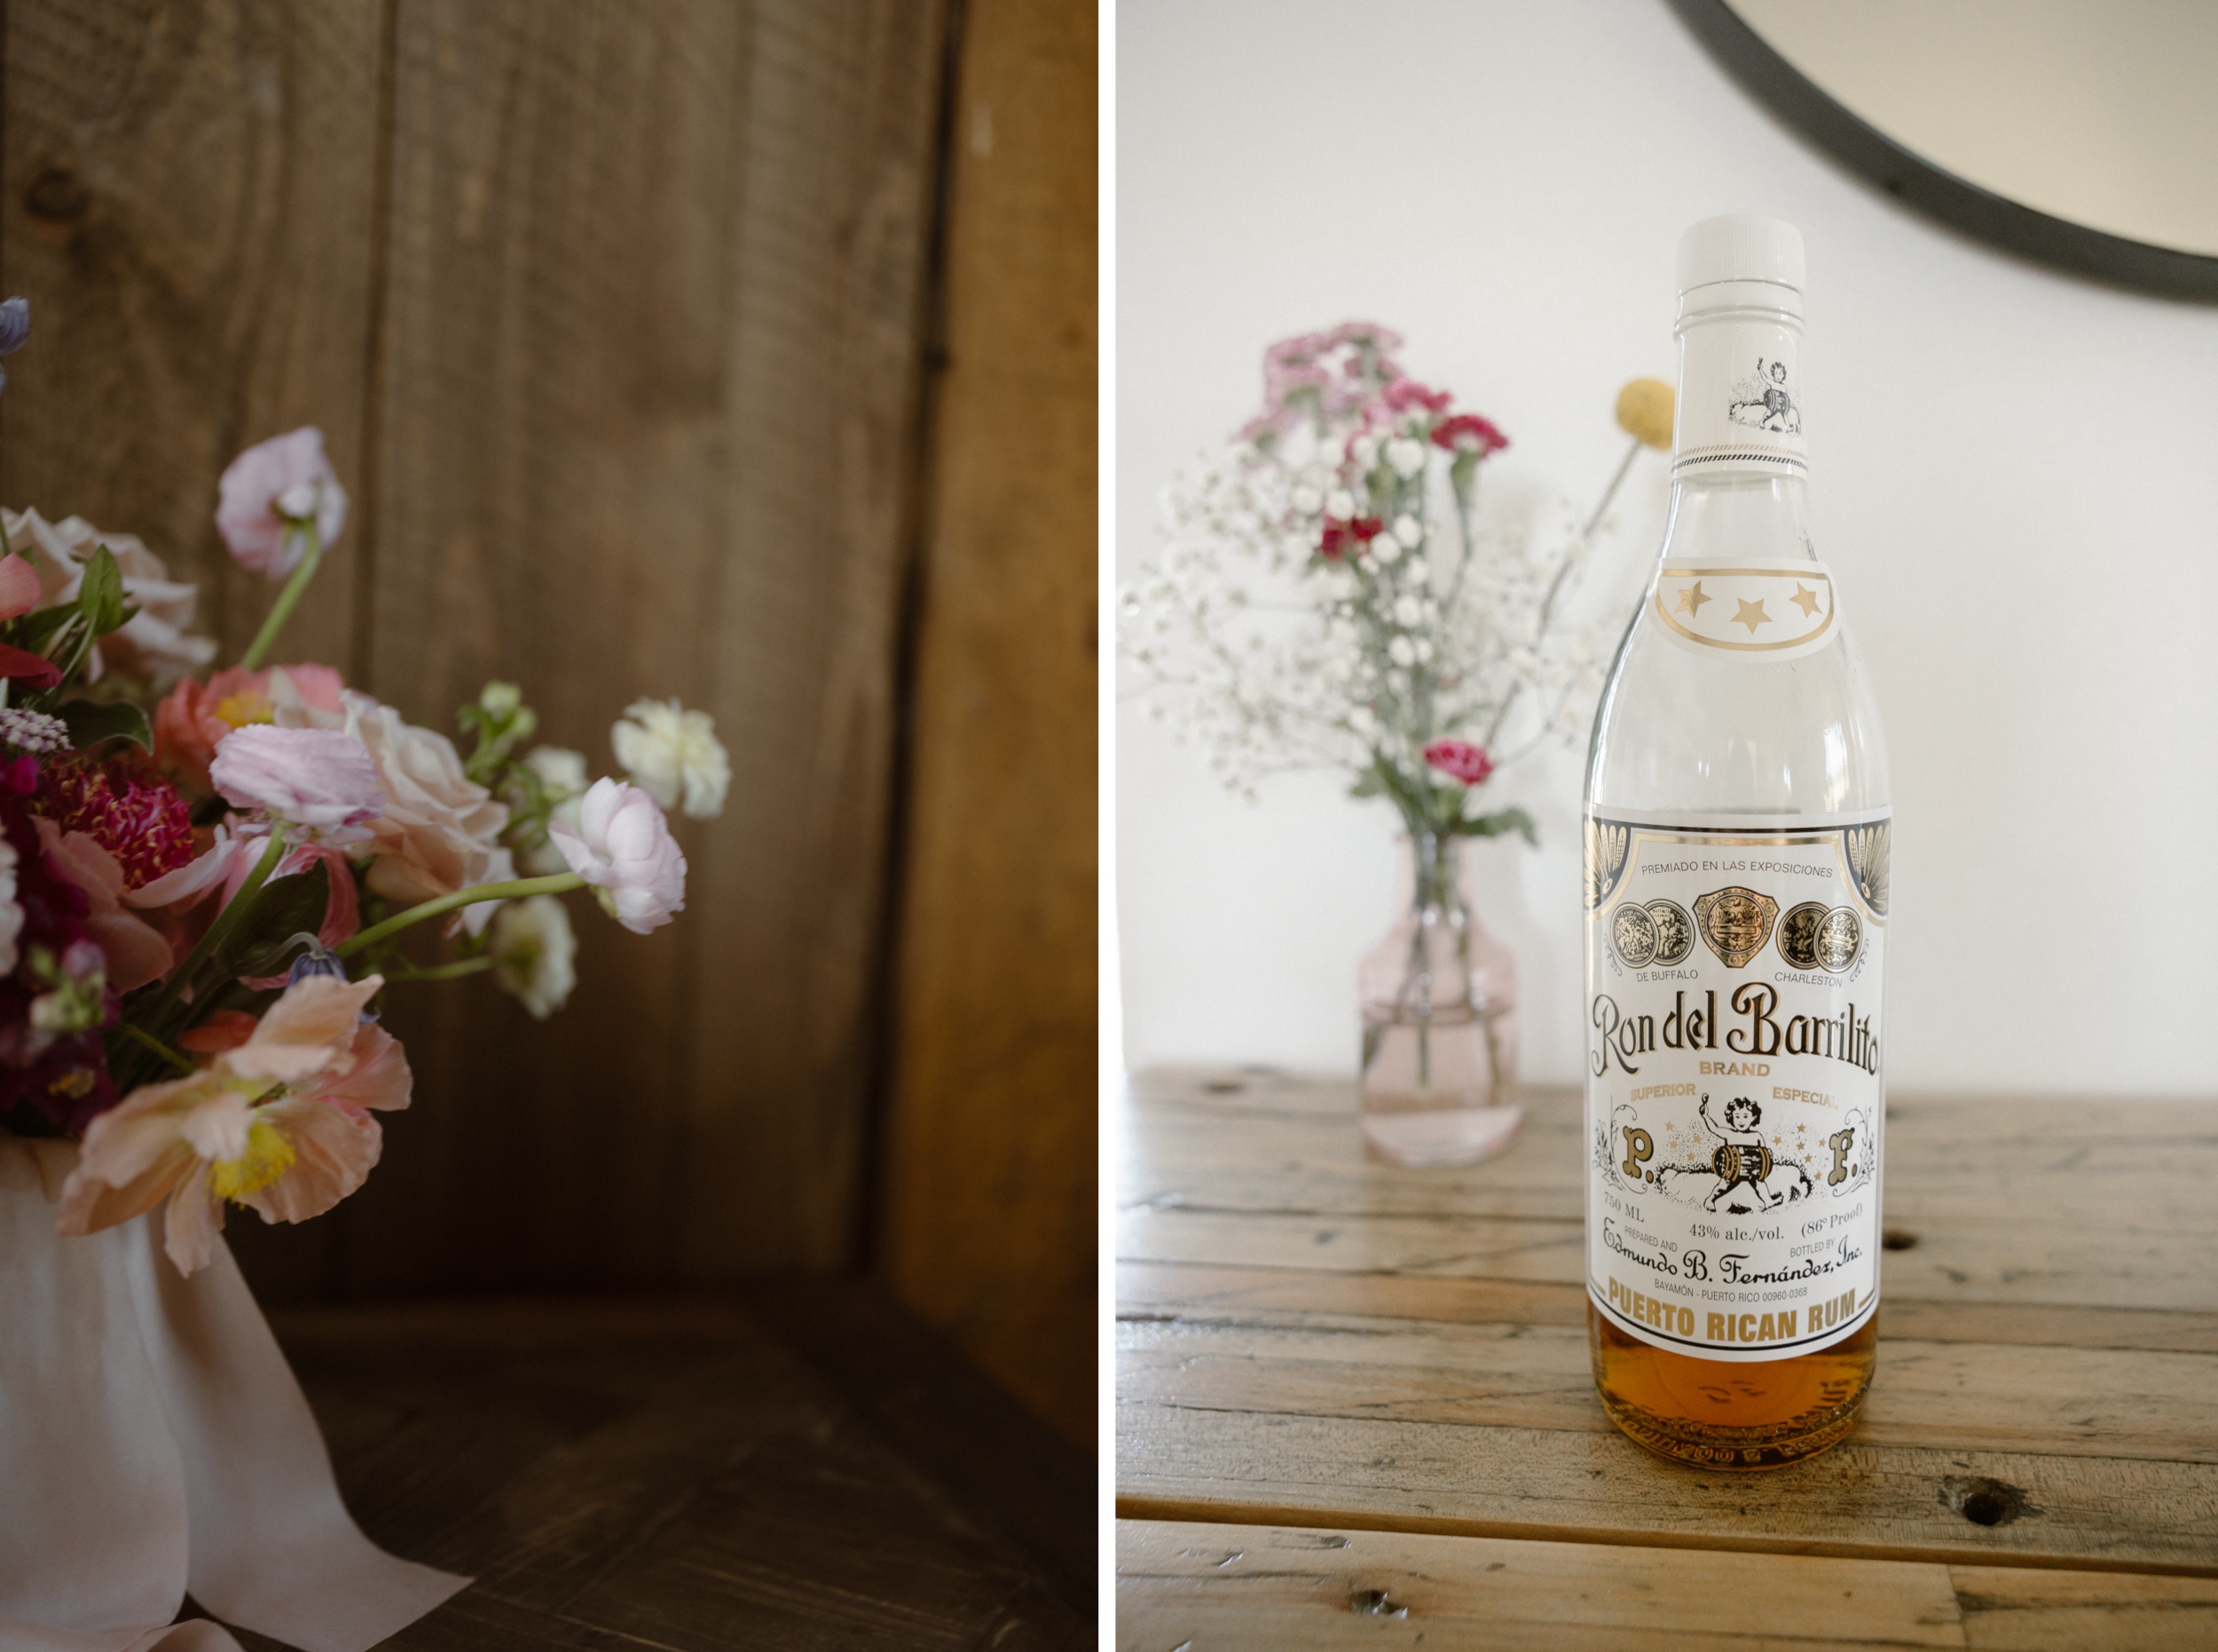 Two photos side by side showcasing a bottle of Puerto Rican rum and a wedding bouquet. Photo by Ashley Joyce.